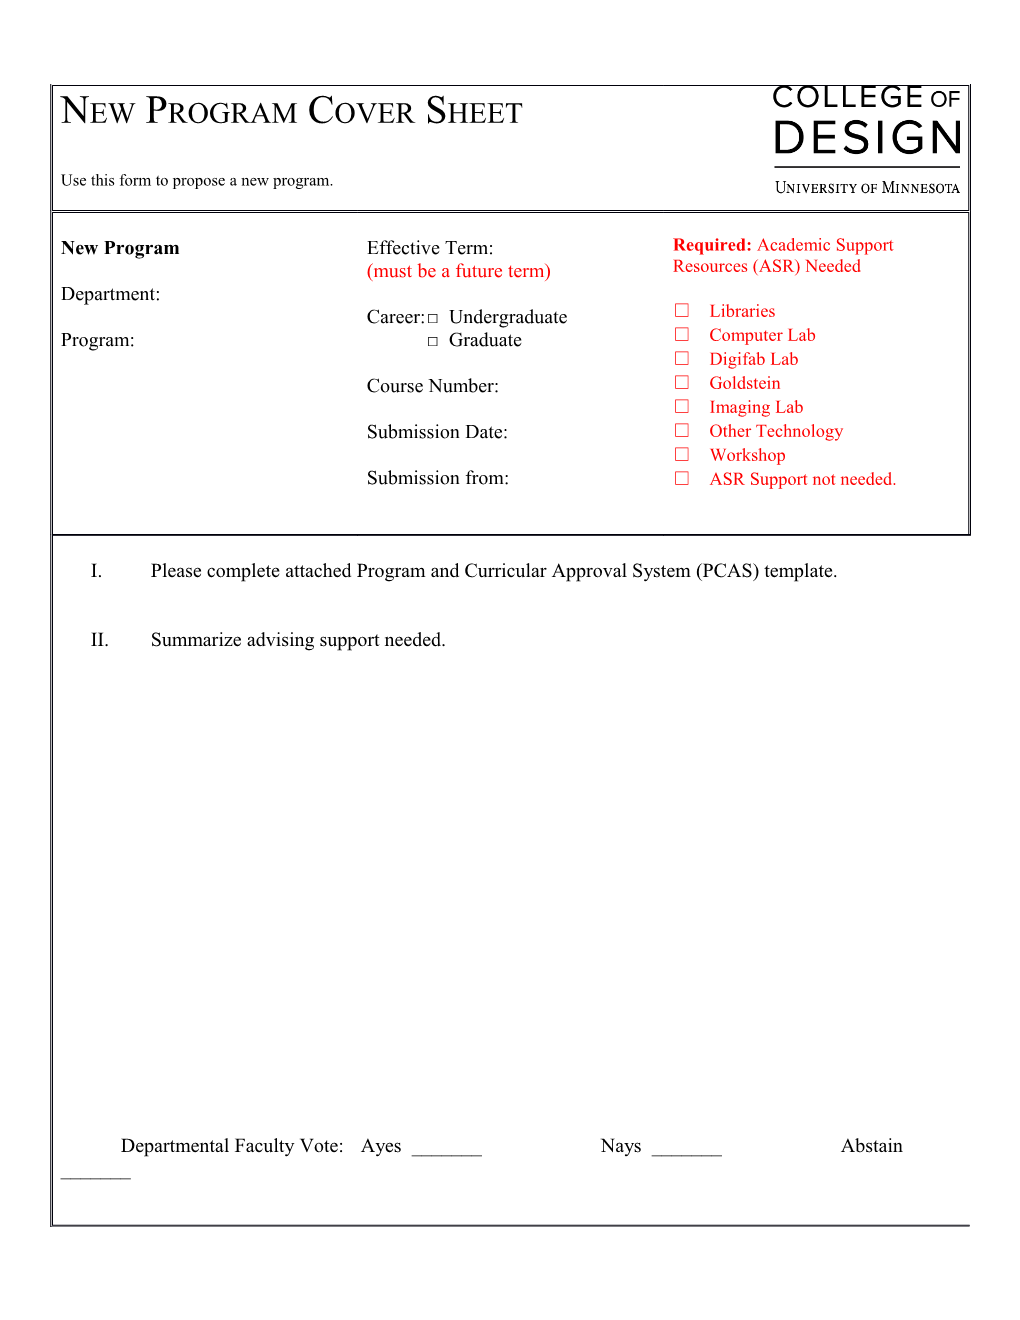 Program and Curriculum Approval System (PCAS) Template